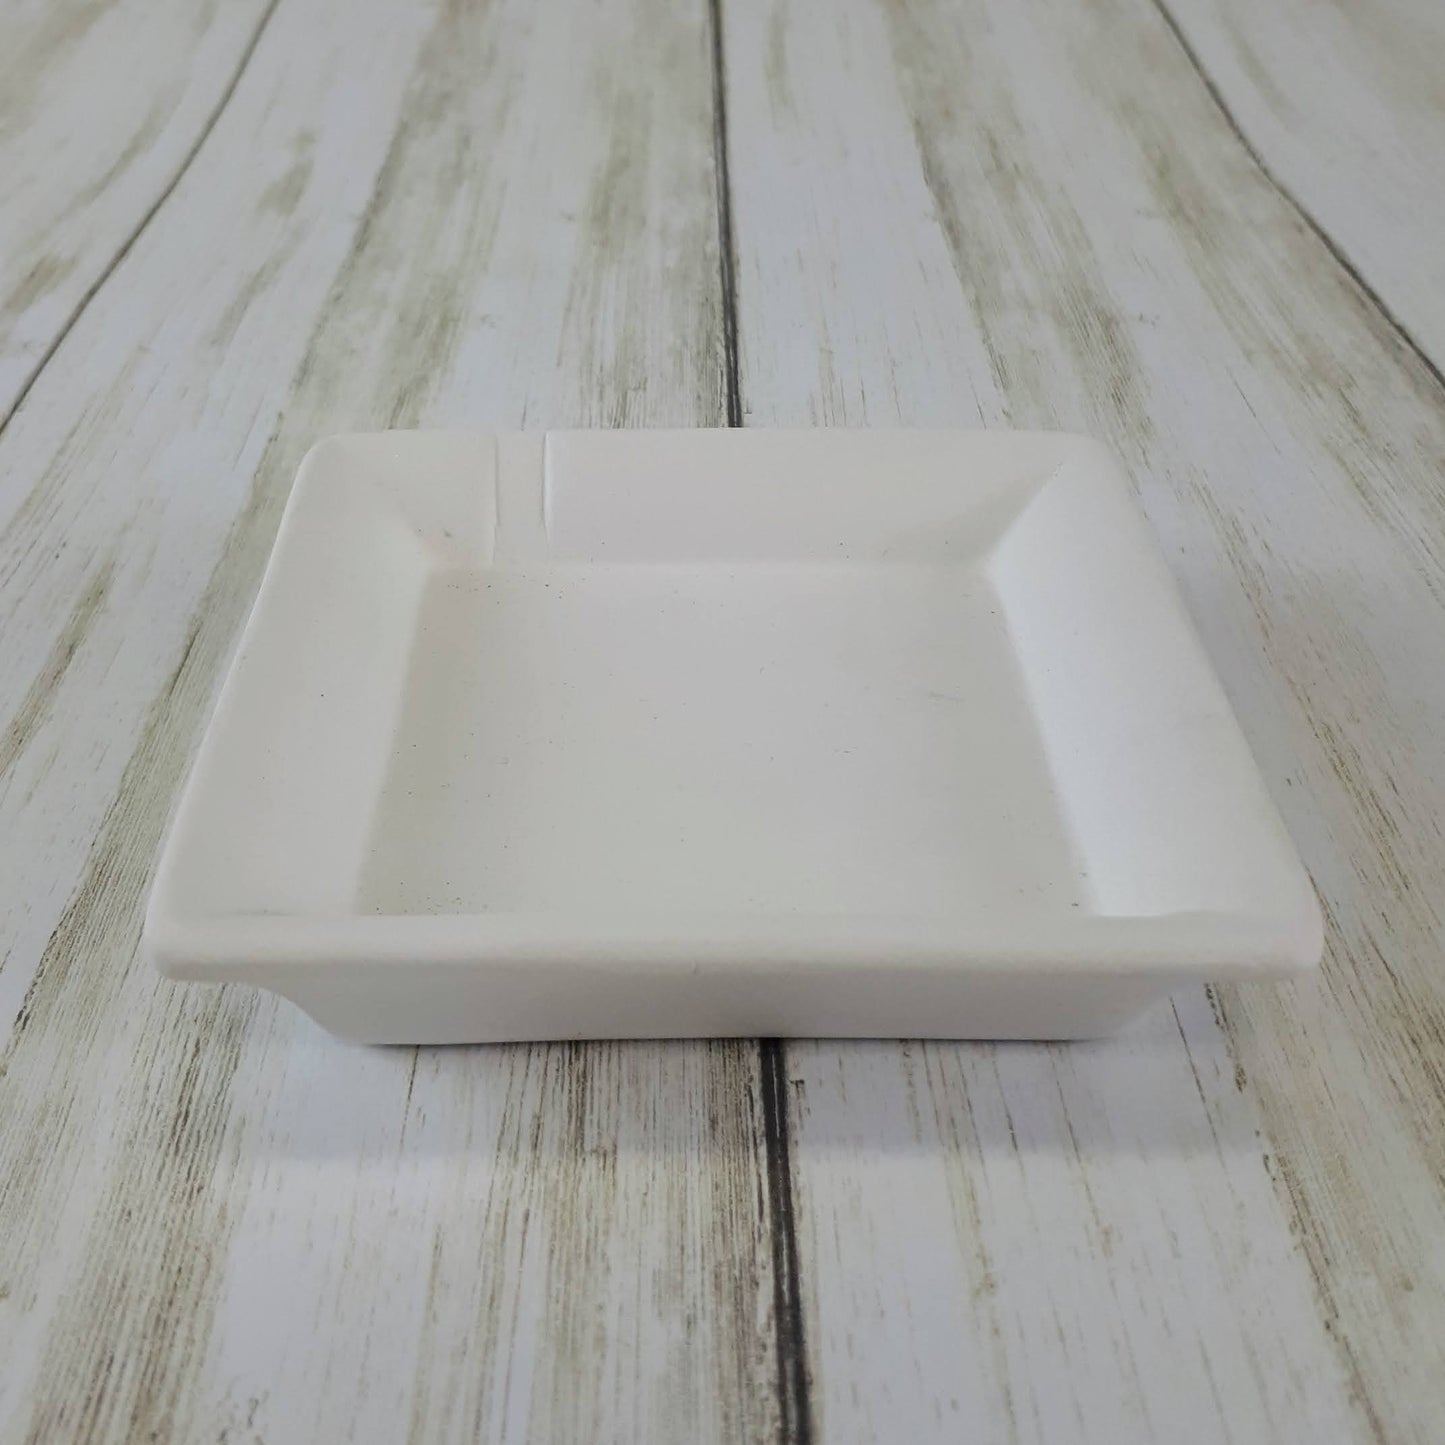 Small Soy Sauce Dish